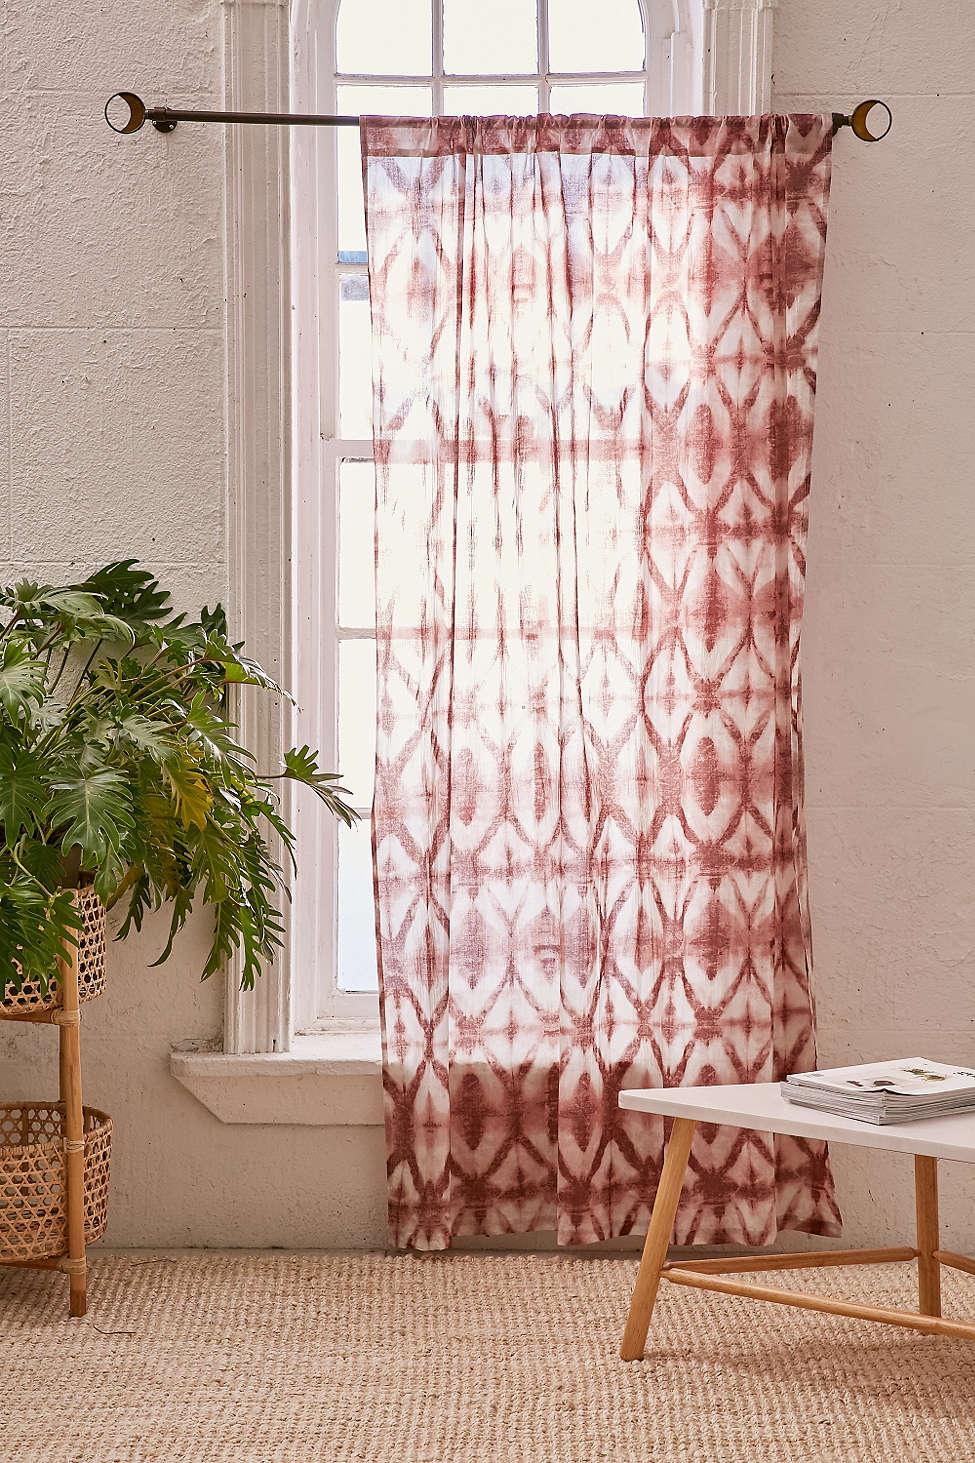 Cotton Shibori curtain from Urban Outfitters